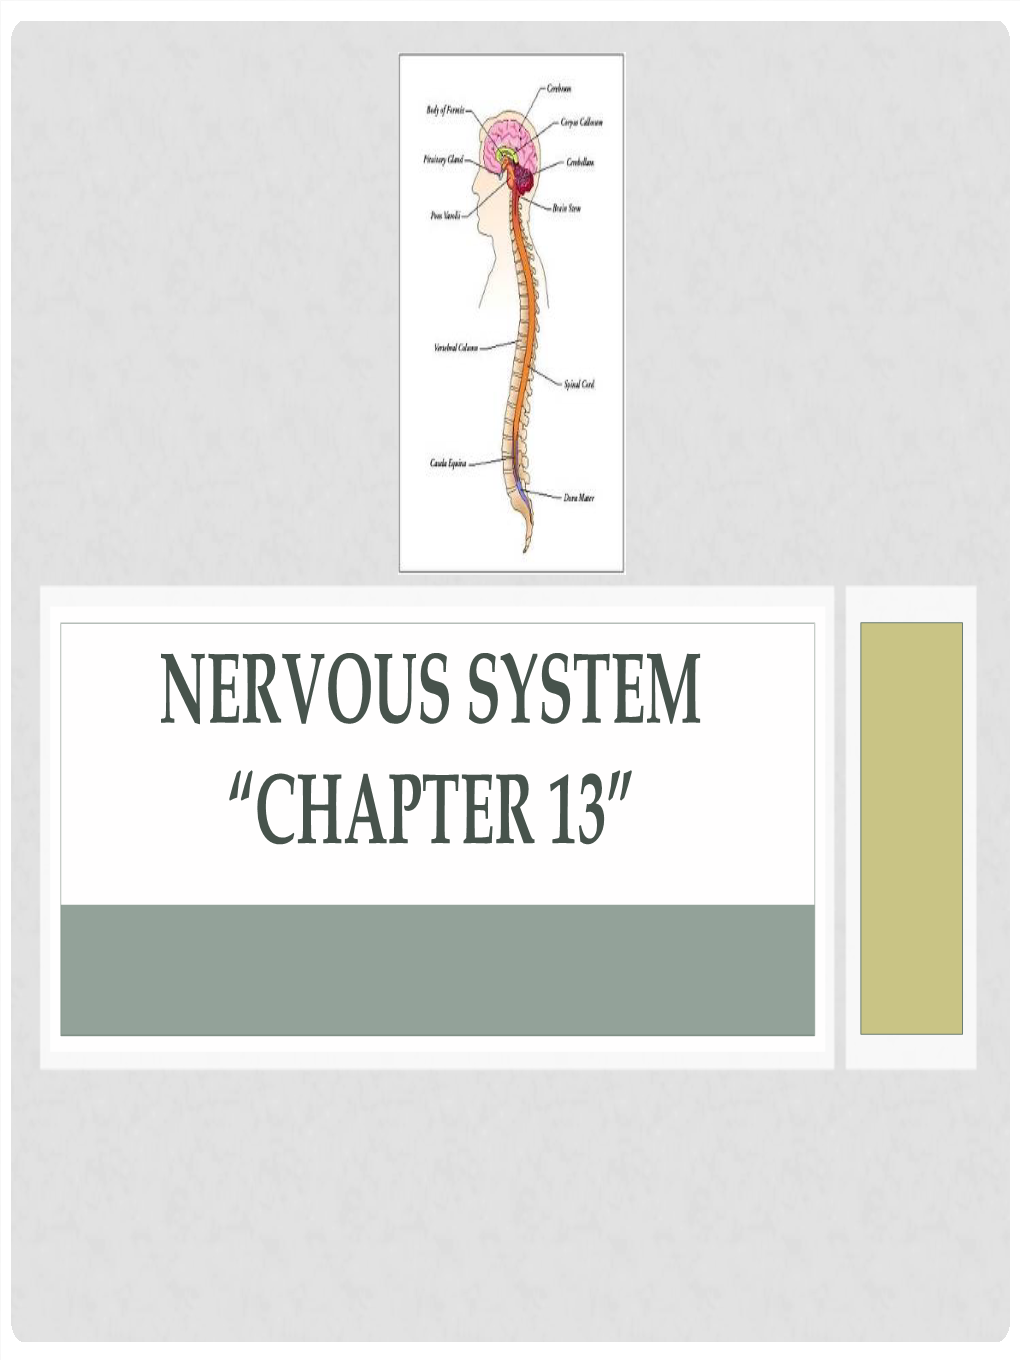 Nervous System “Chapter 13” General Outcomes